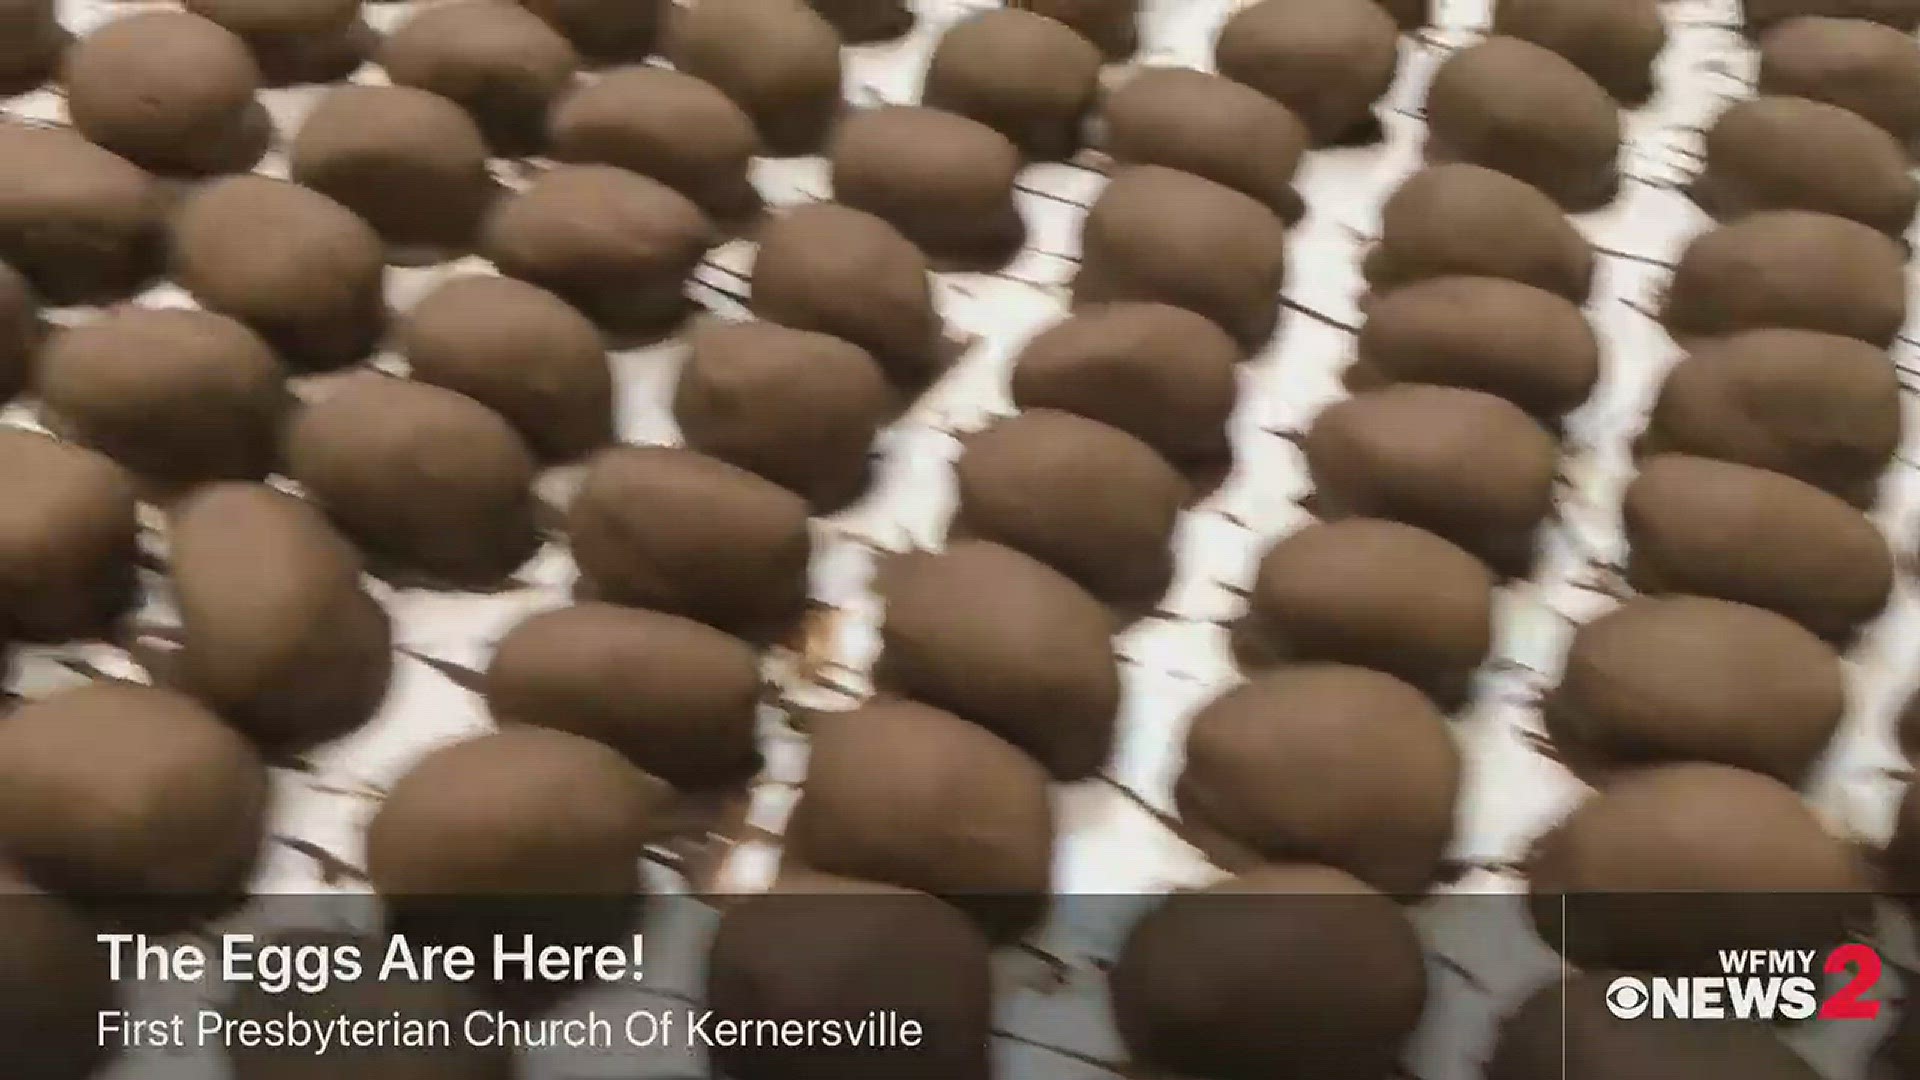 First Presbyterian Church Of Kernersville, also known as the "Egg Church," is selling their homemade chocolate-dipped peanut butter and coconut eggs again! All profits go to local charities.